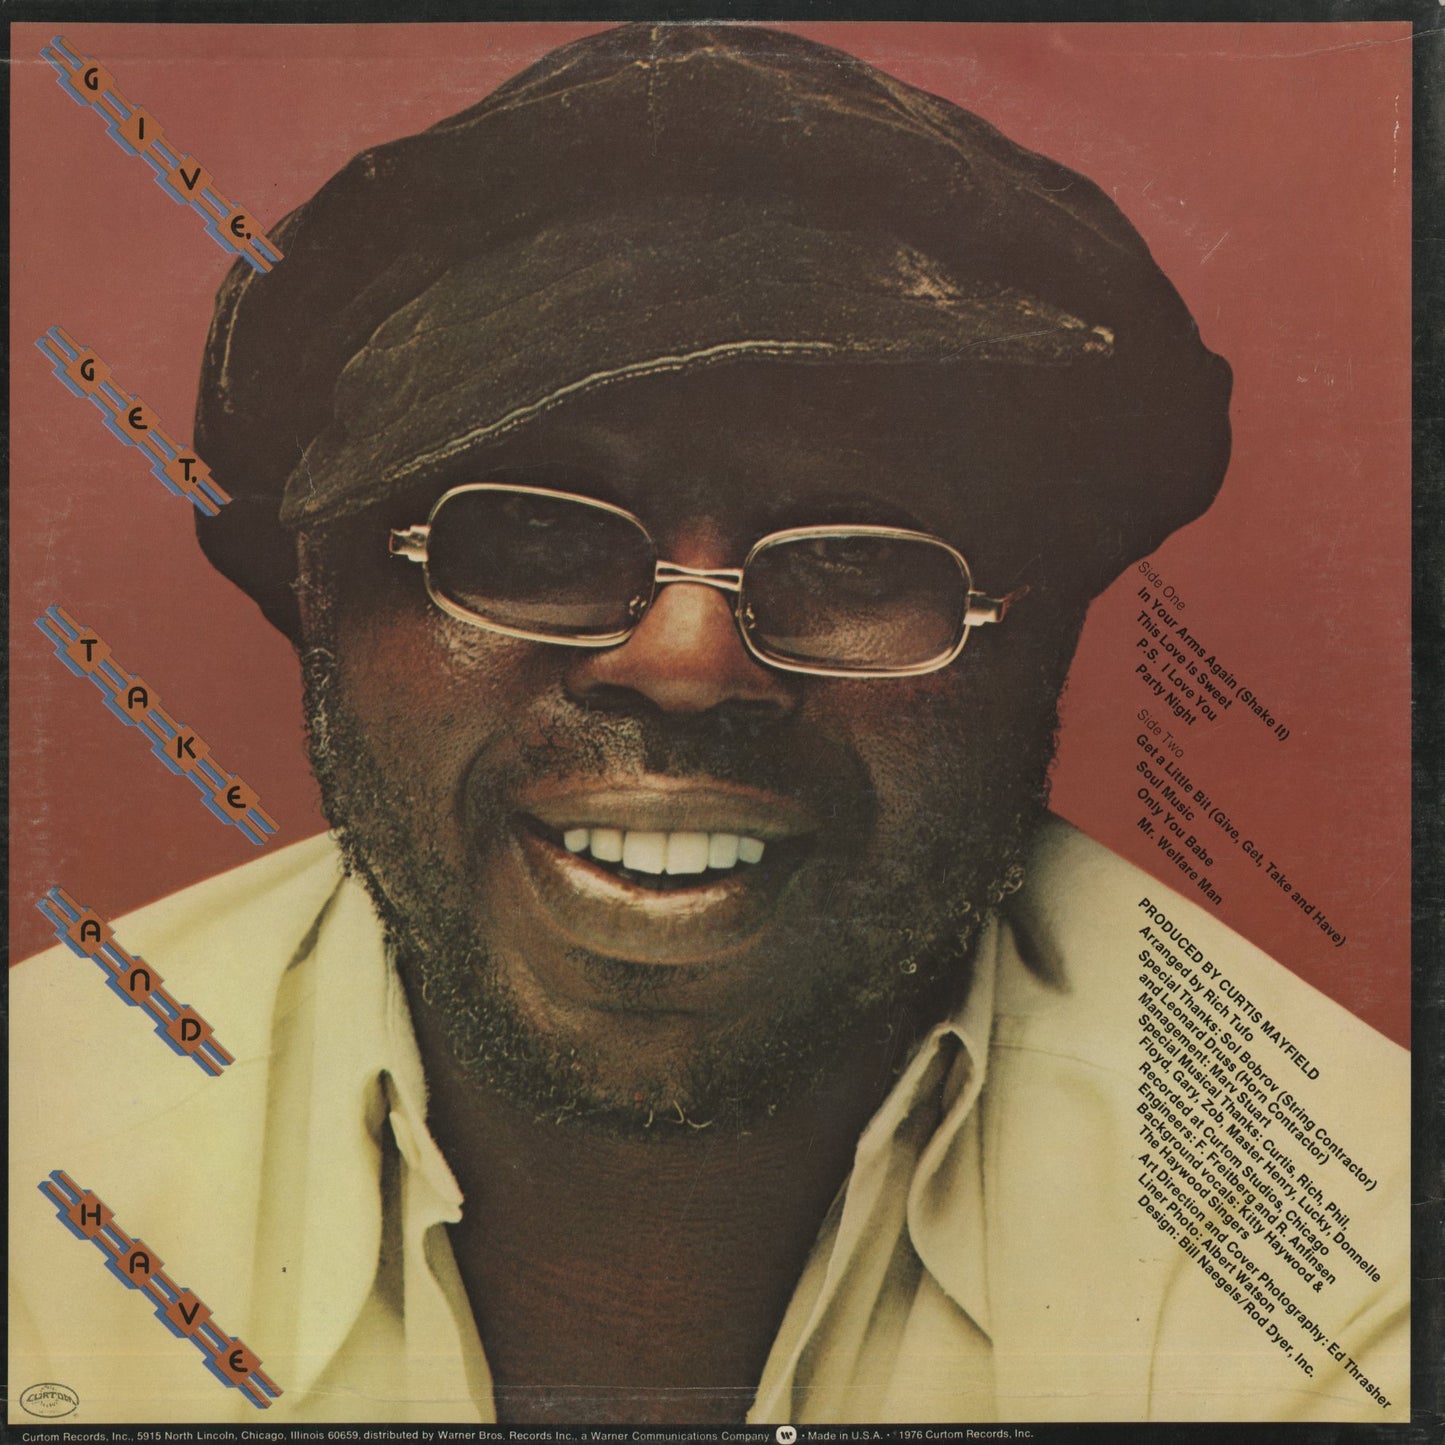 Curtis Mayfield / カーティス・メイフィールド / Give Get Take And Have (CU 5007)